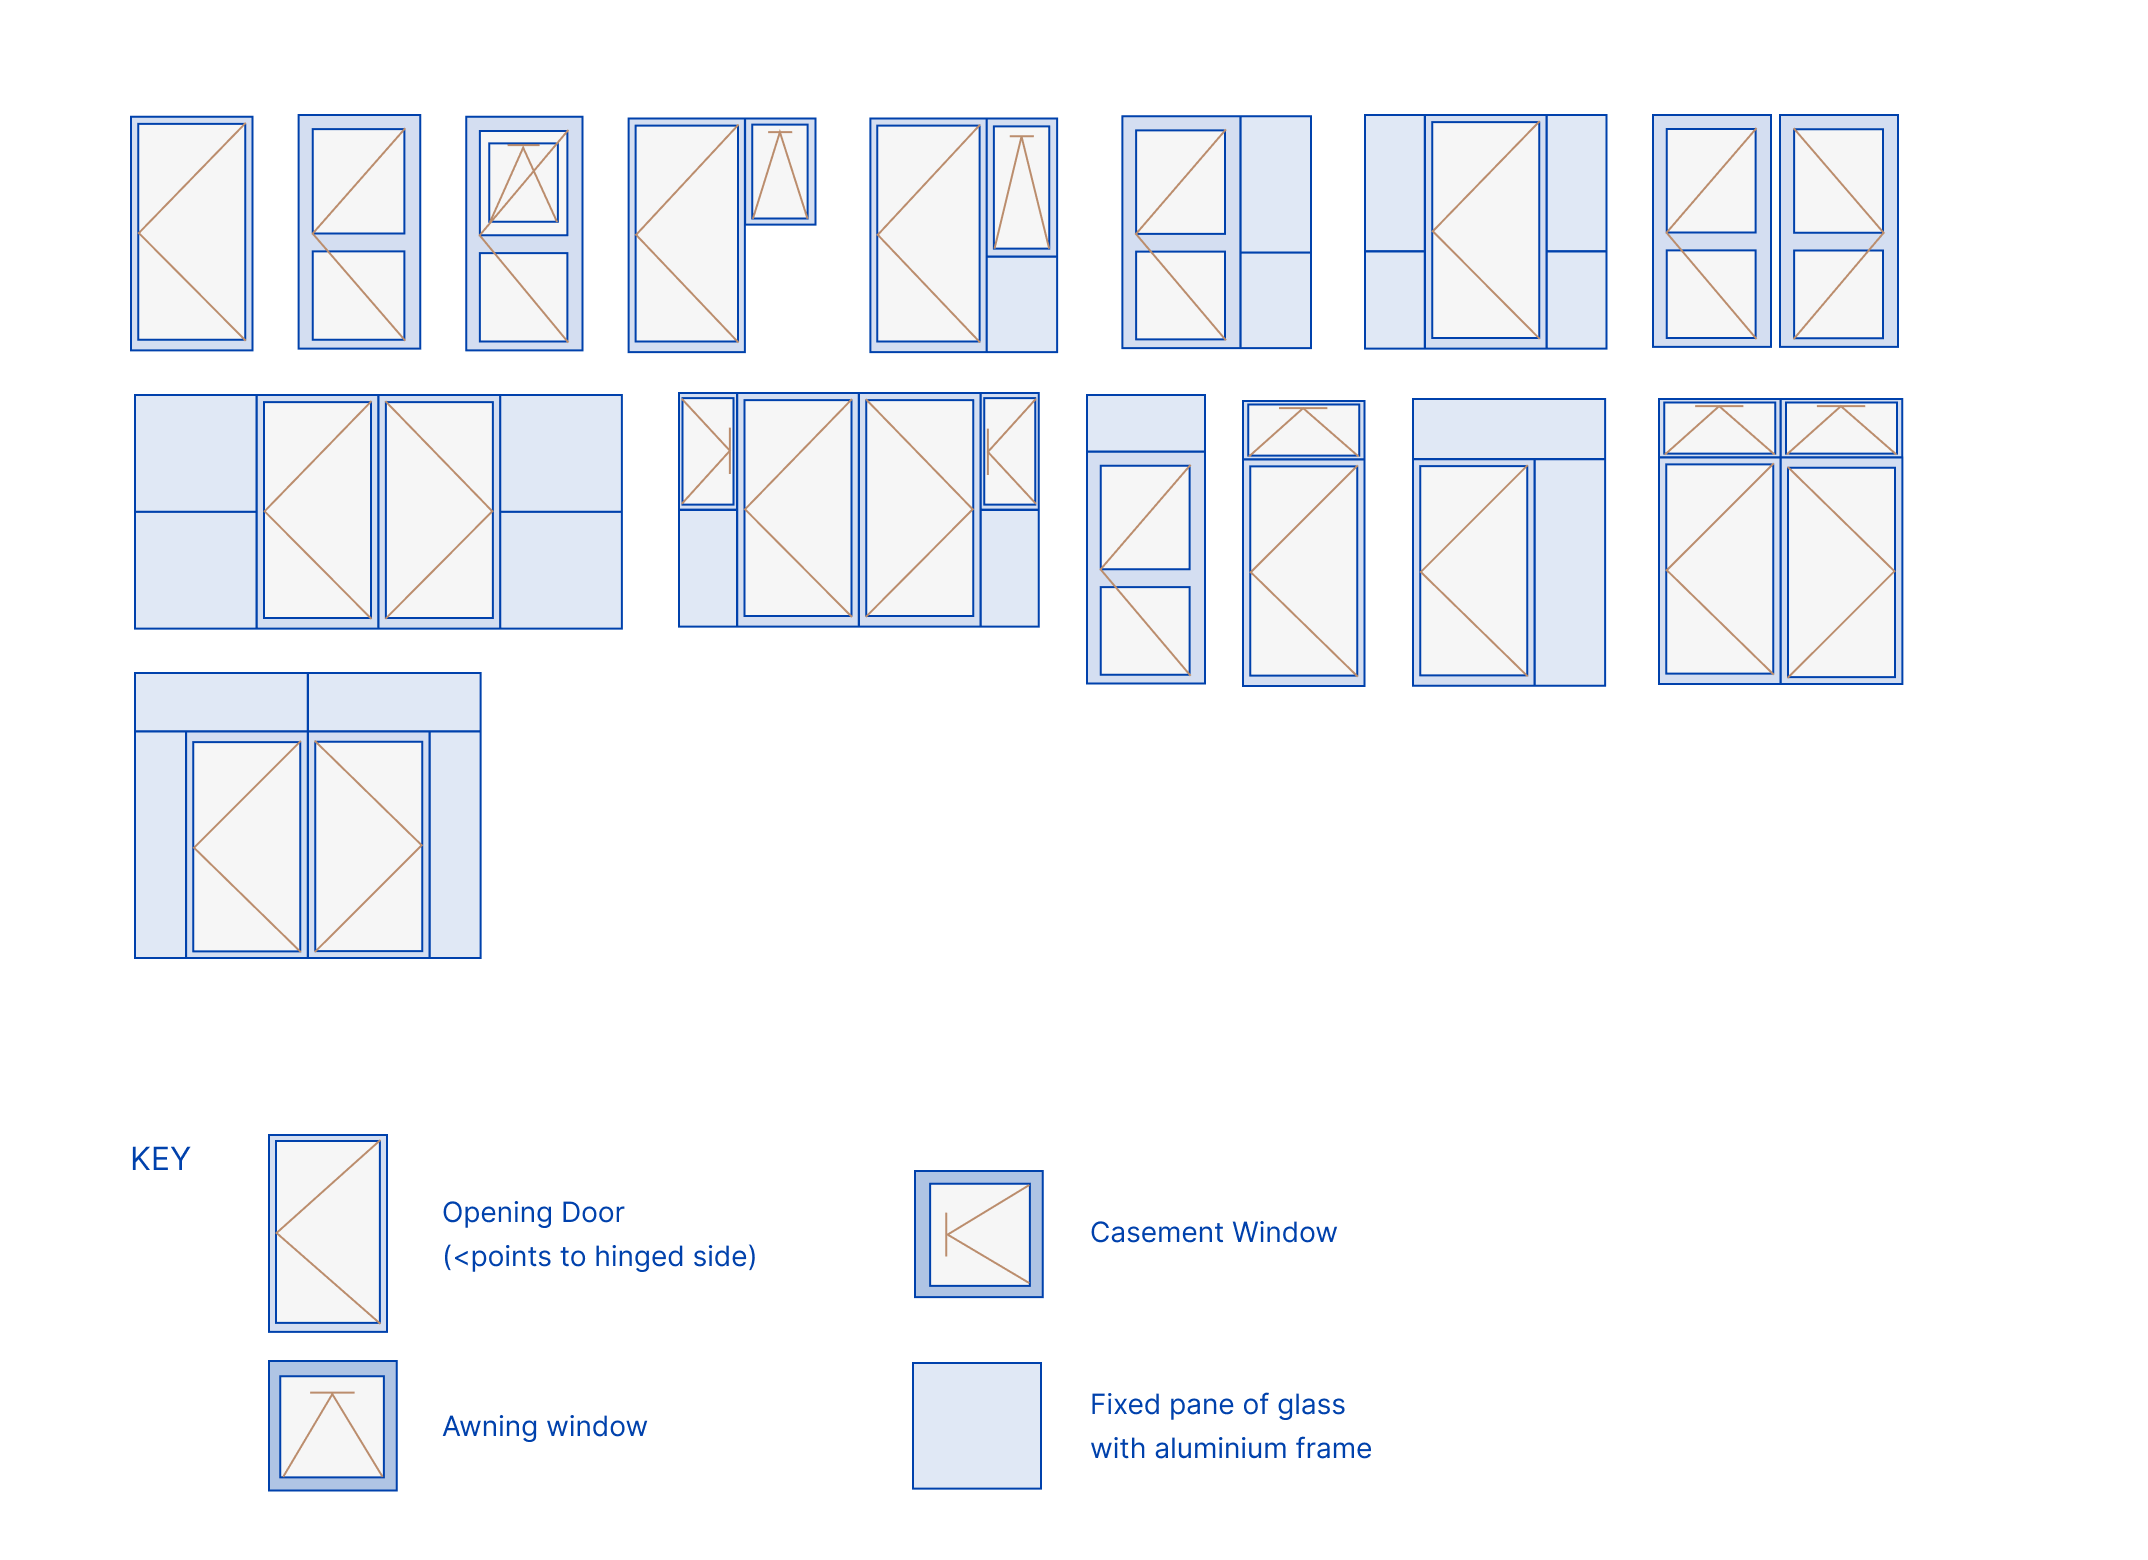 Duco Hinge and French doors option diagrams